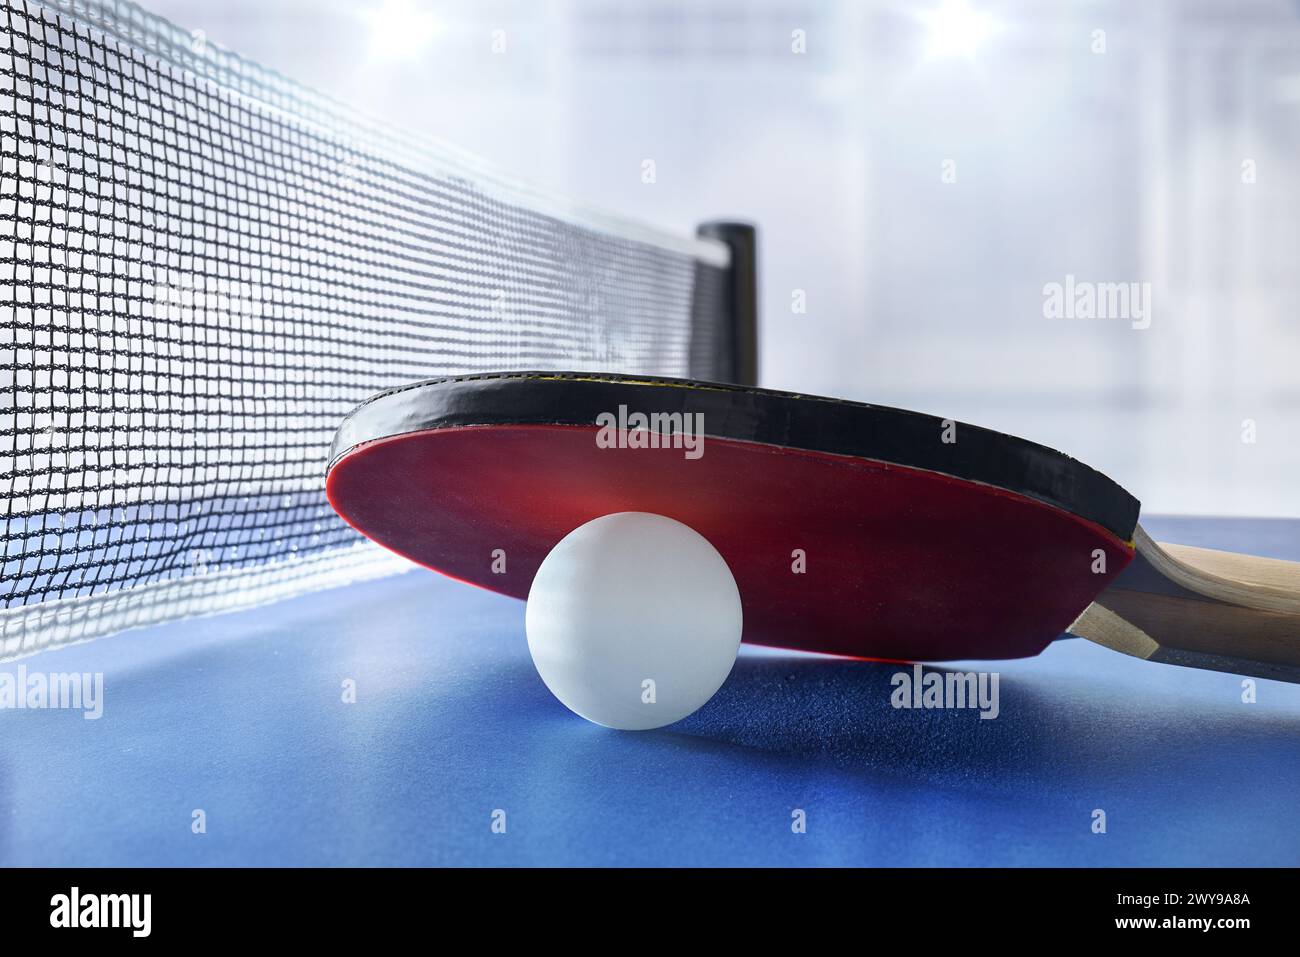 Ping pong paddle resting on white ball on a blue game table next to the game net with sports pavilion with lighting in the background. Front view. Stock Photo